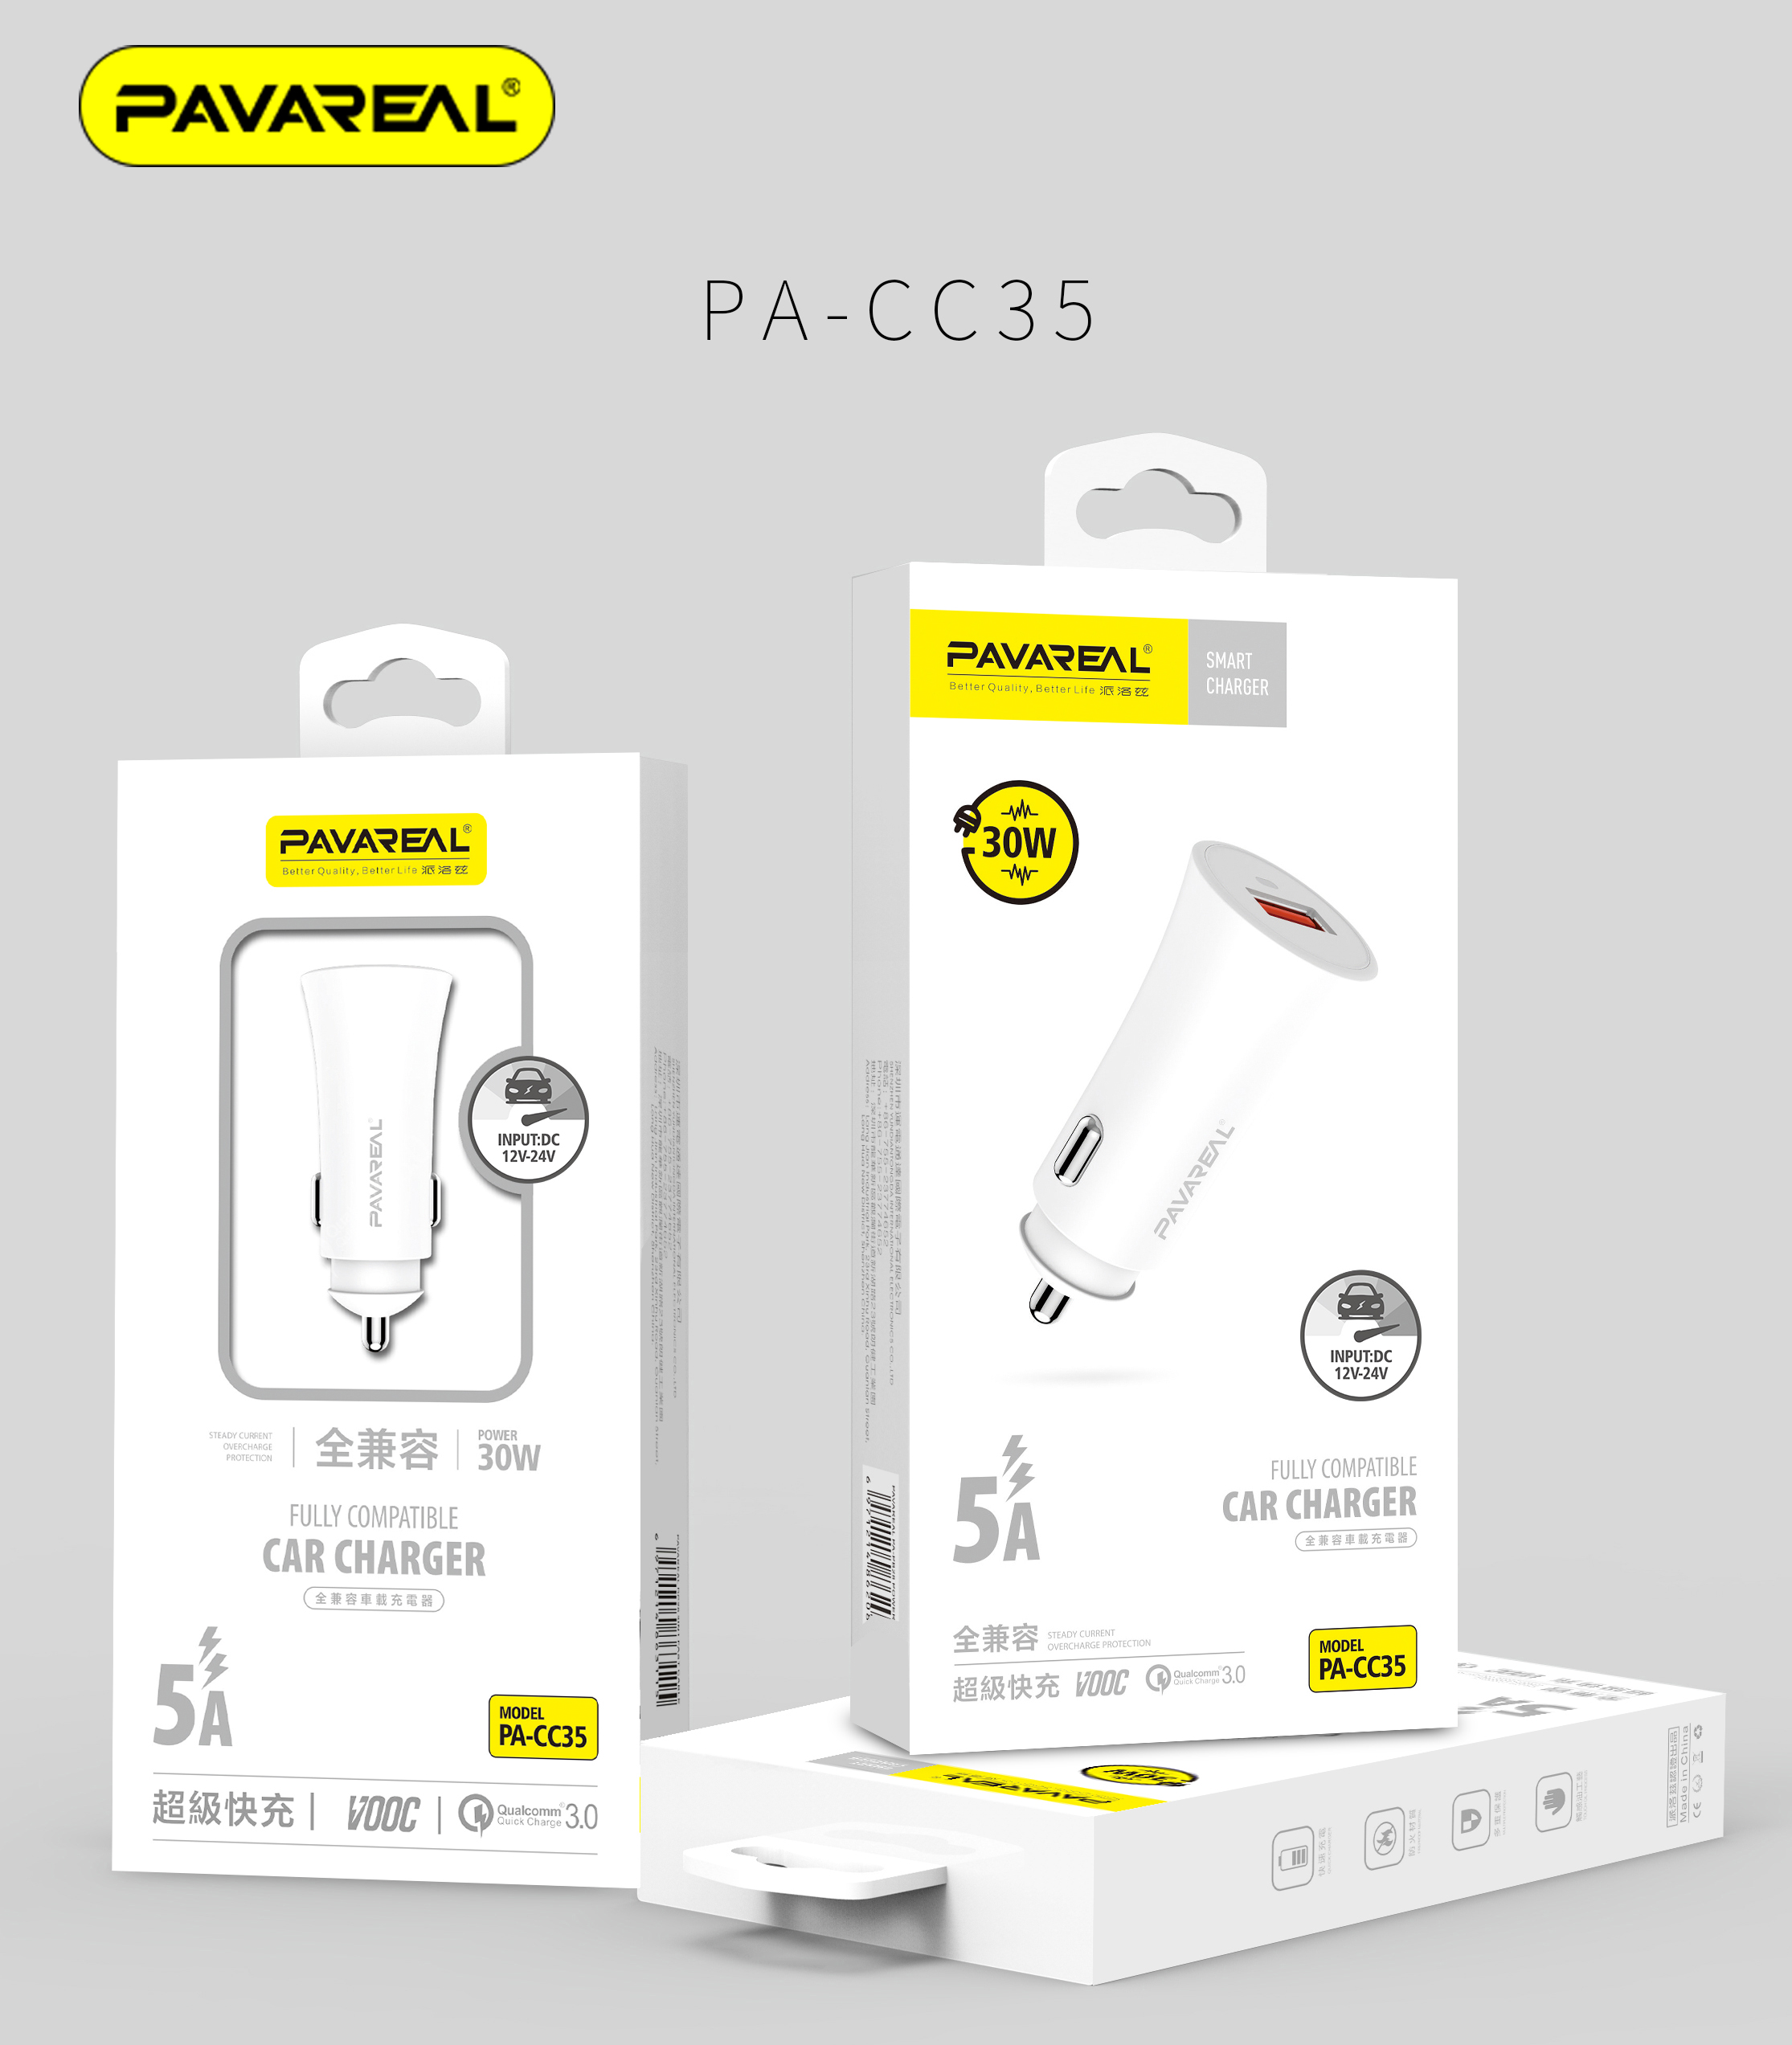 Pavareal PA-CC35 Fully Compatible Qualcomm Quick Charge 3.0 / VOOC 5A 30W Car Charger